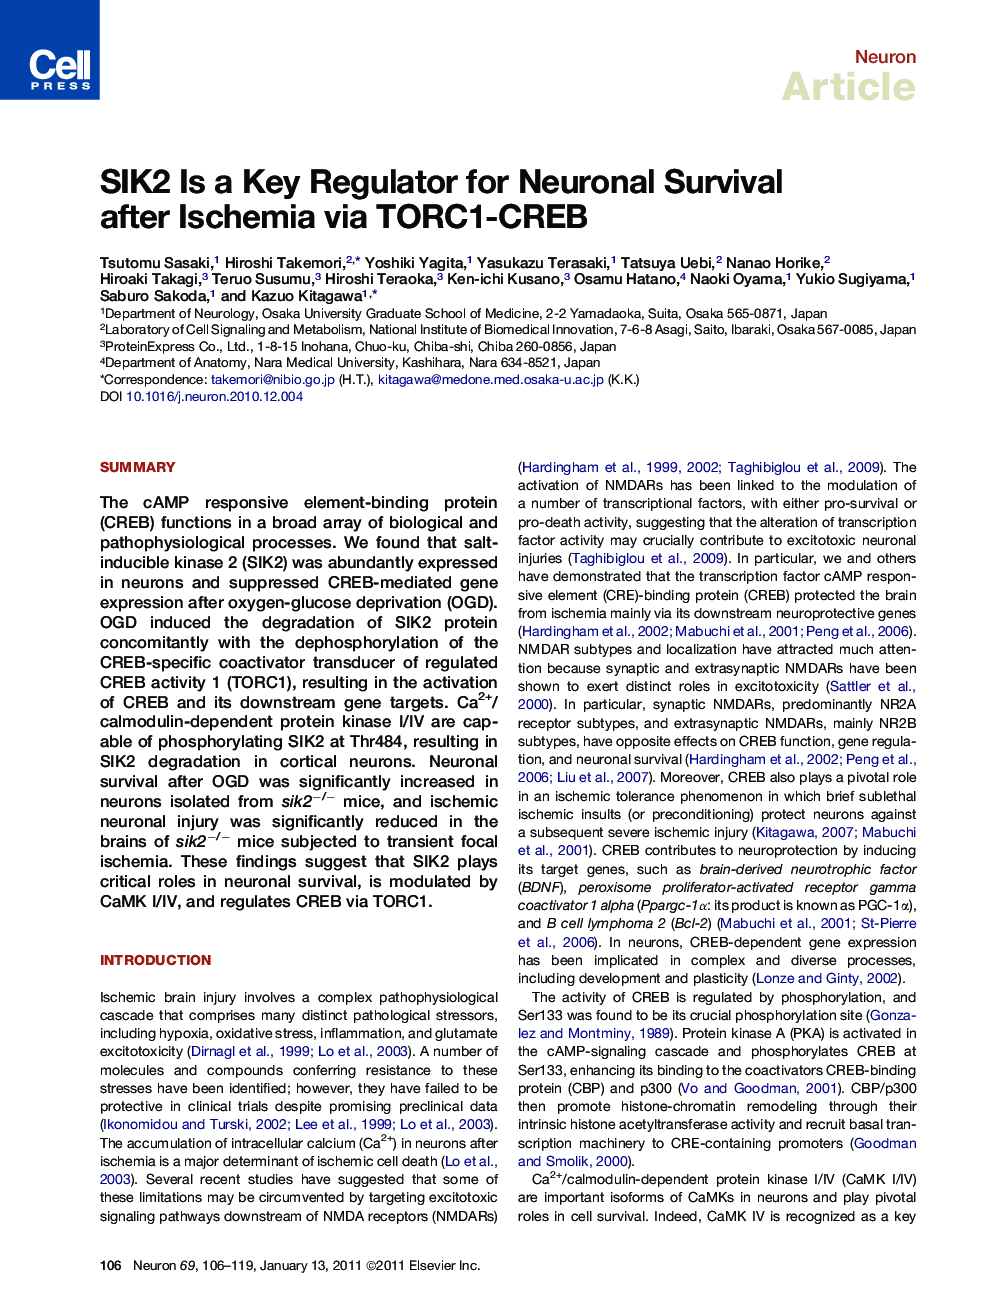 SIK2 Is a Key Regulator for Neuronal Survival after Ischemia via TORC1-CREB